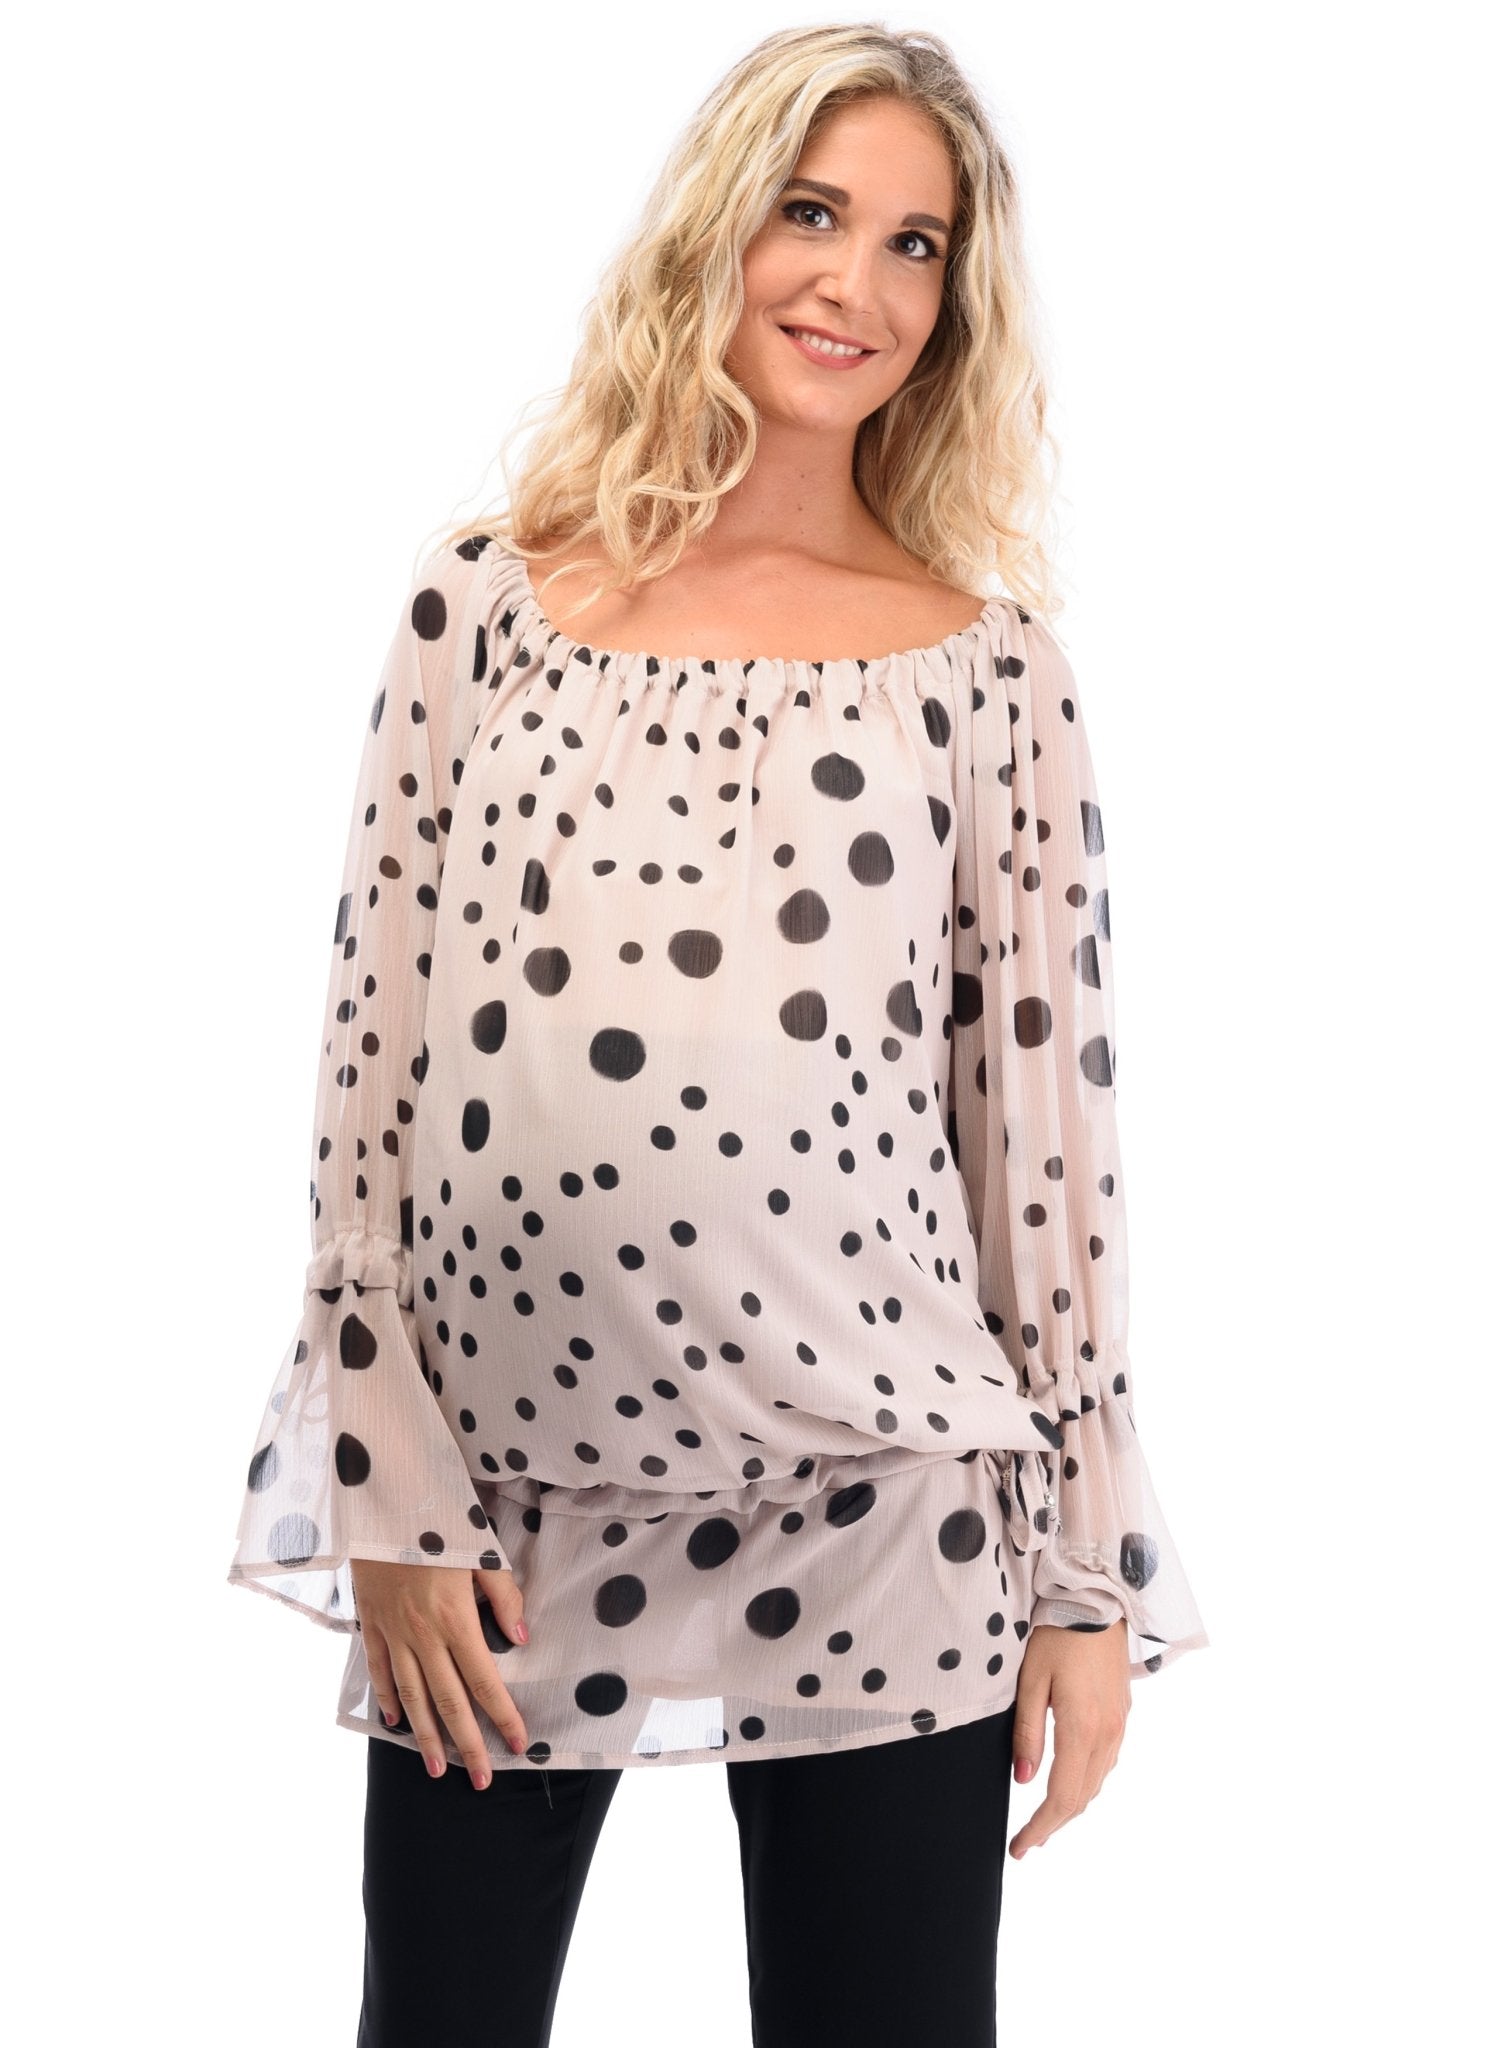 Satin Dotted Print Maternity Top - Mums and Bumps